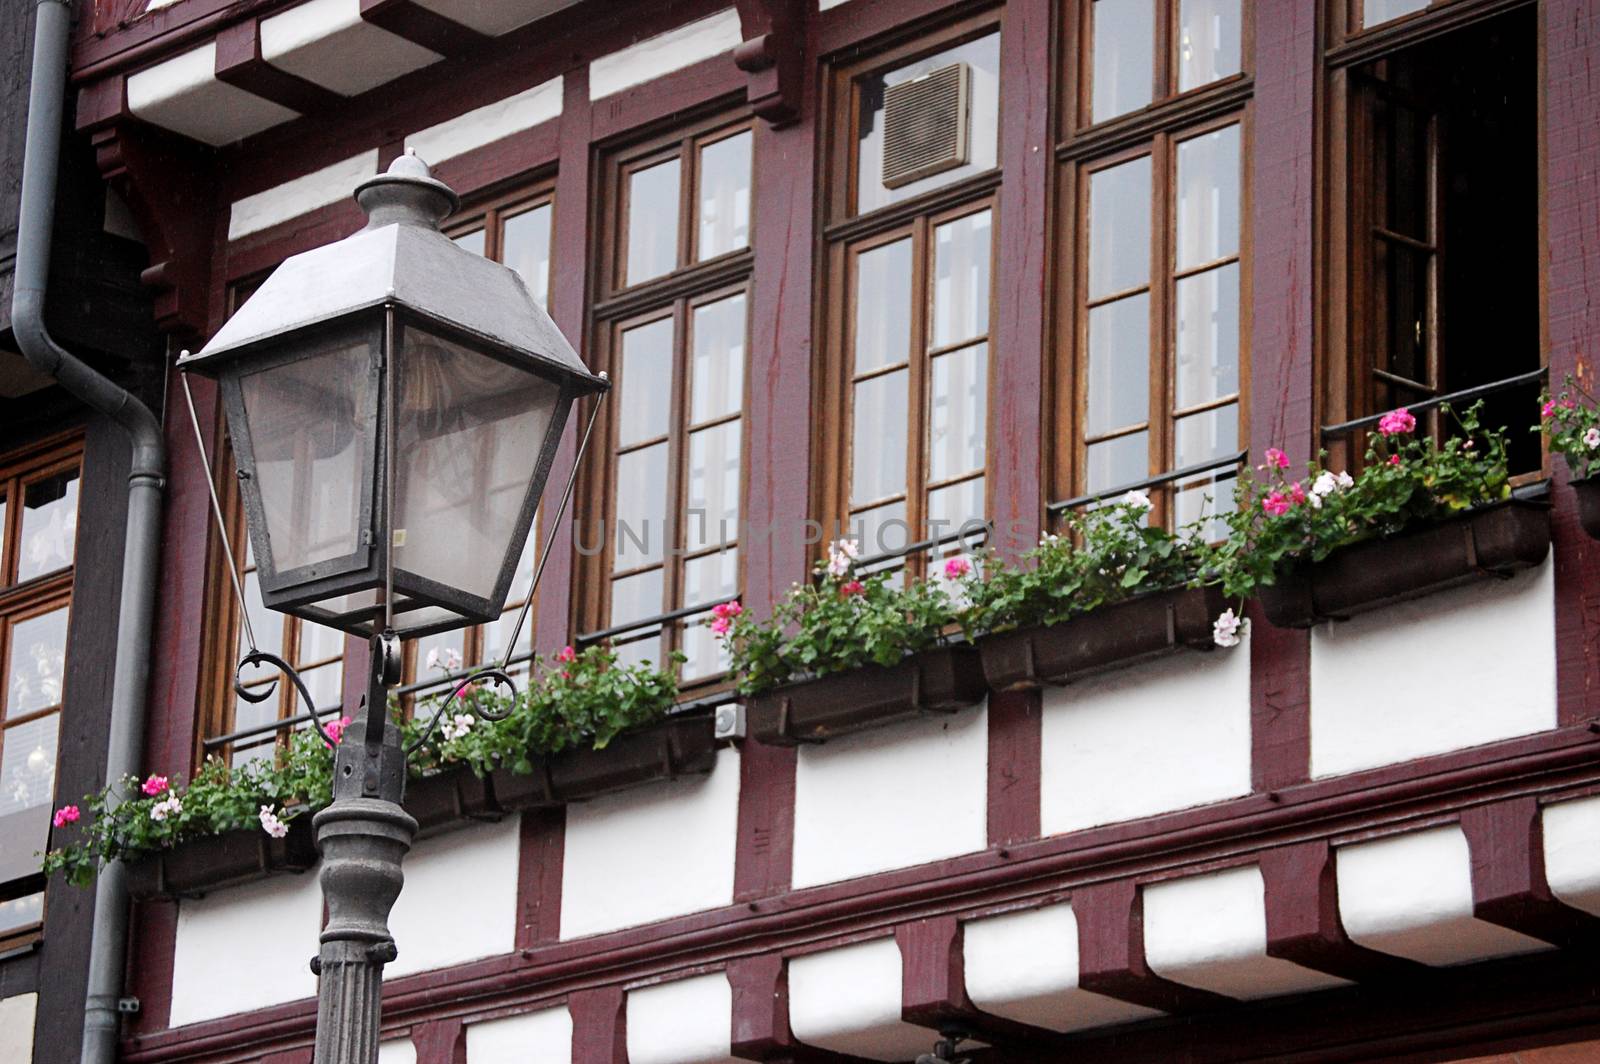 The facades of old buildings in Europe